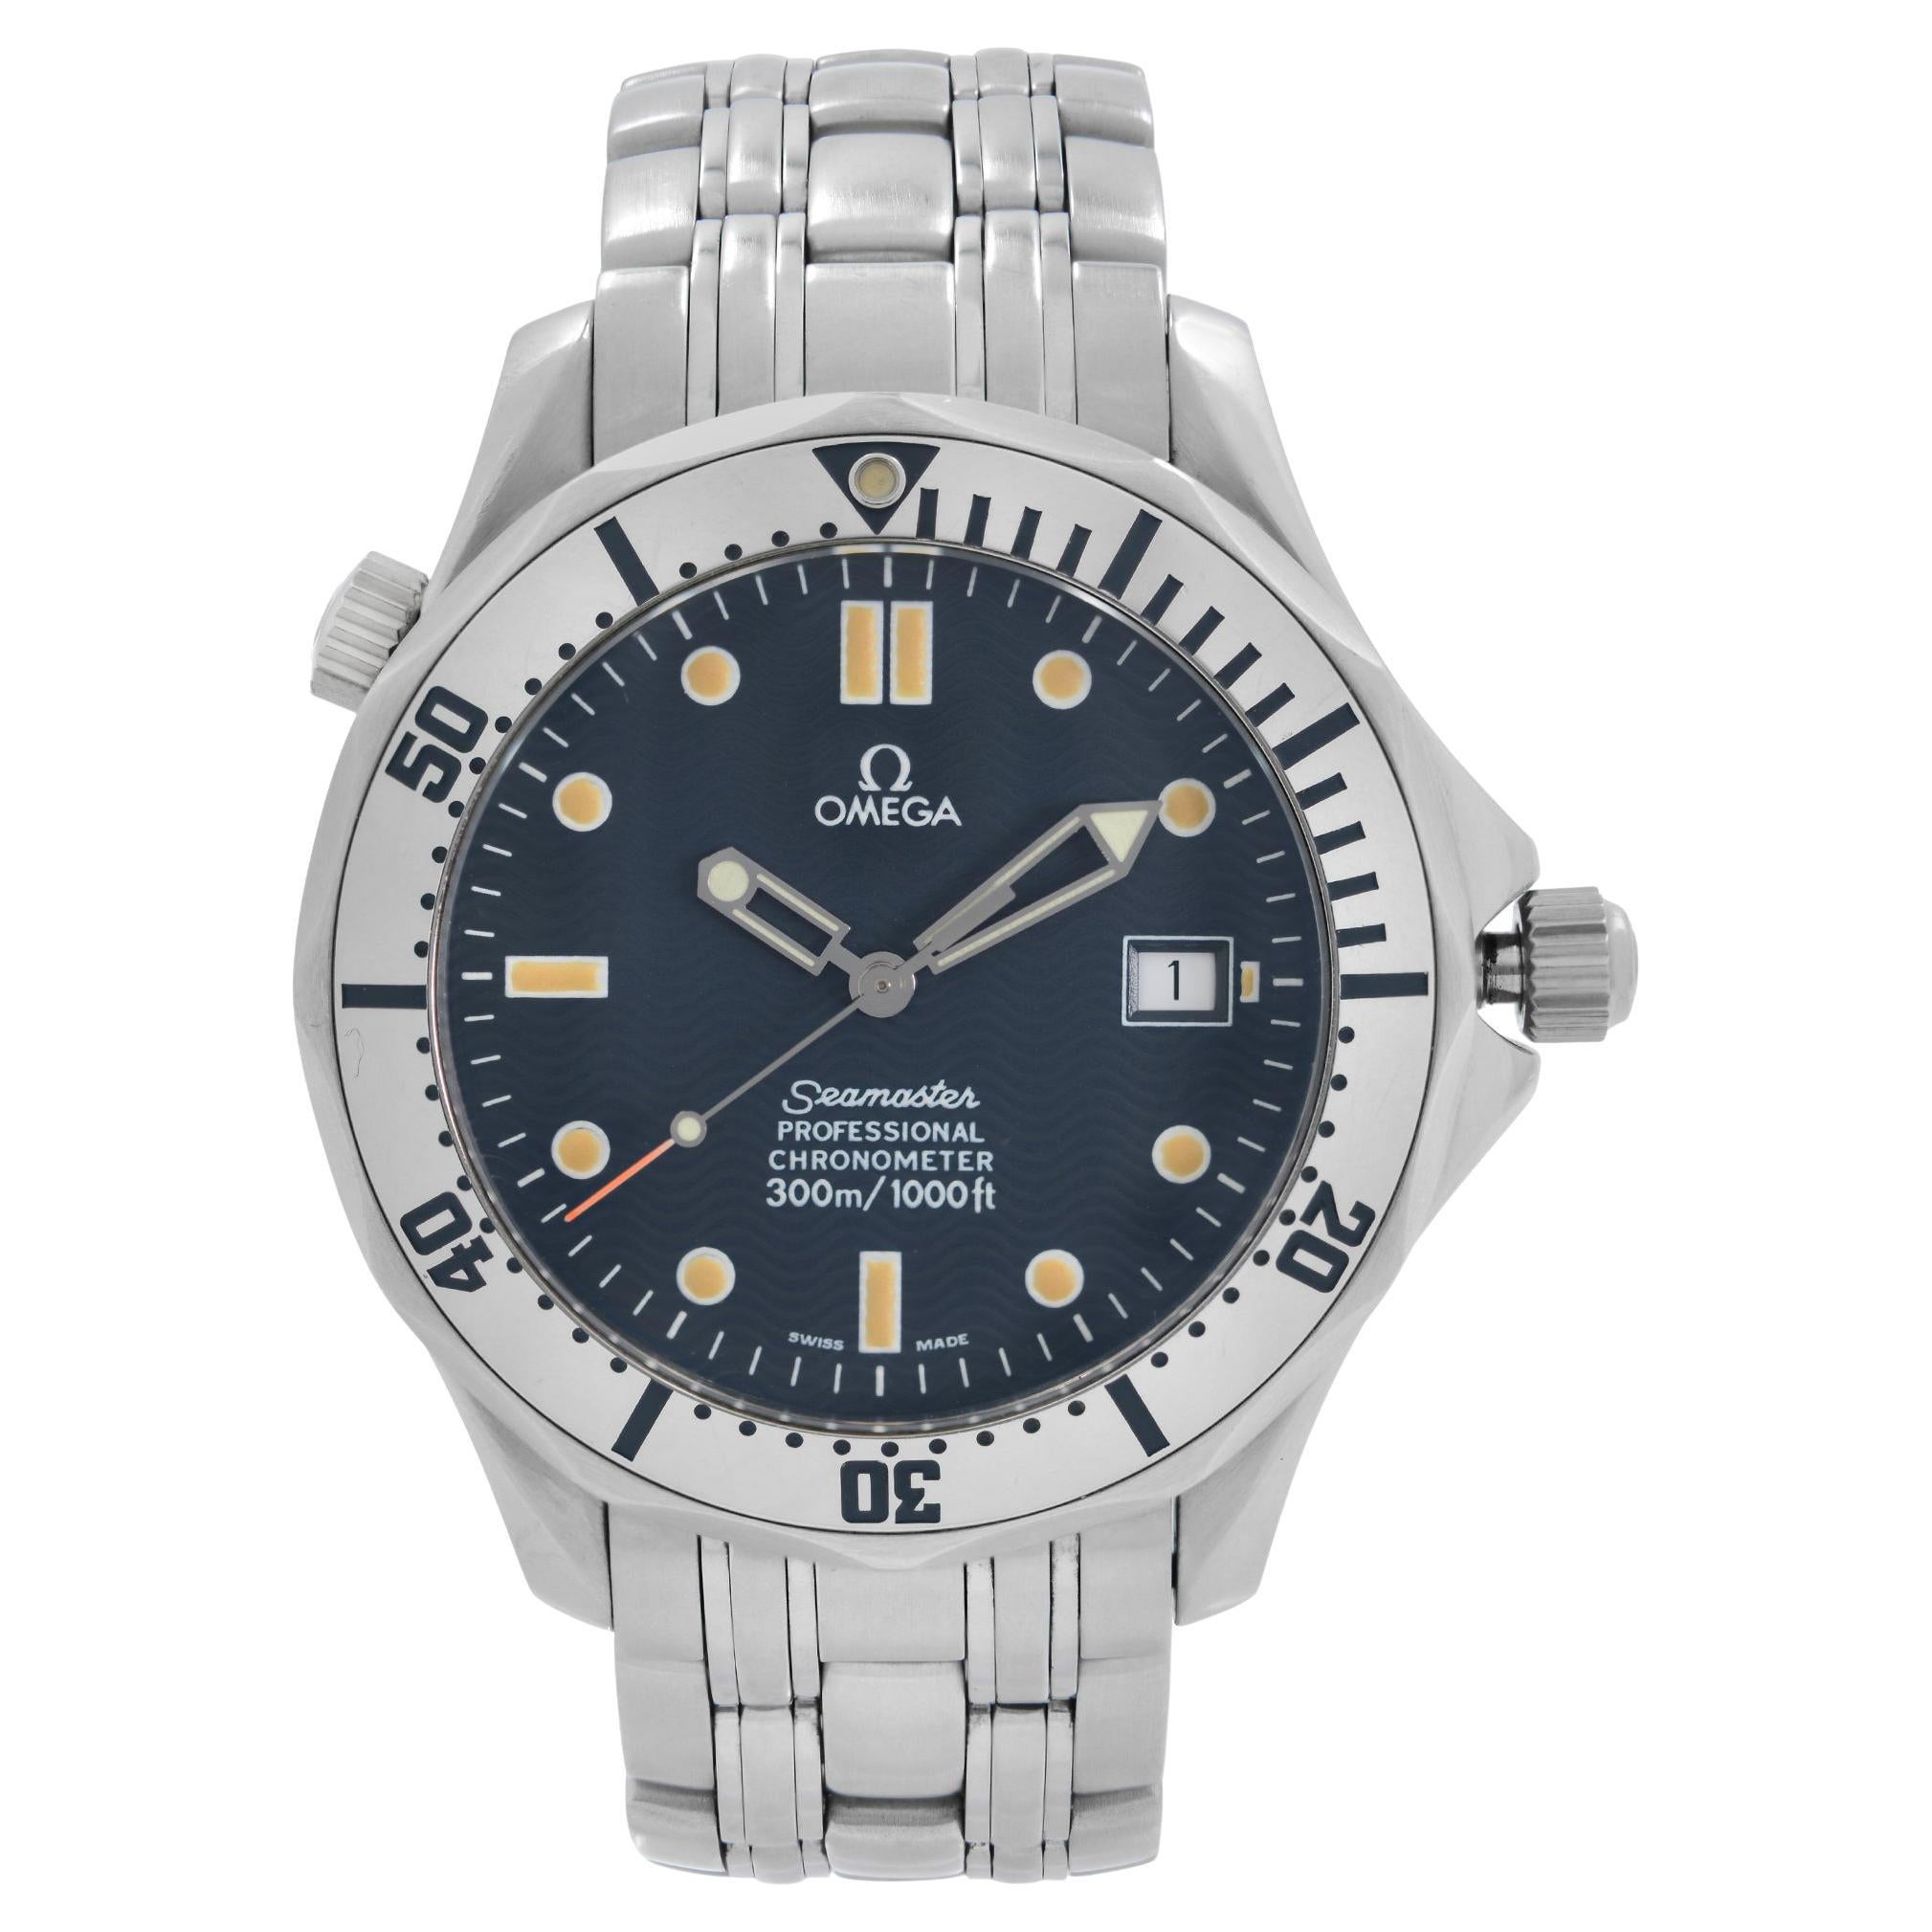 Omega Seamaster Diver 300m Steel Blue Wave Dial Automatic Watch 2532.80.00